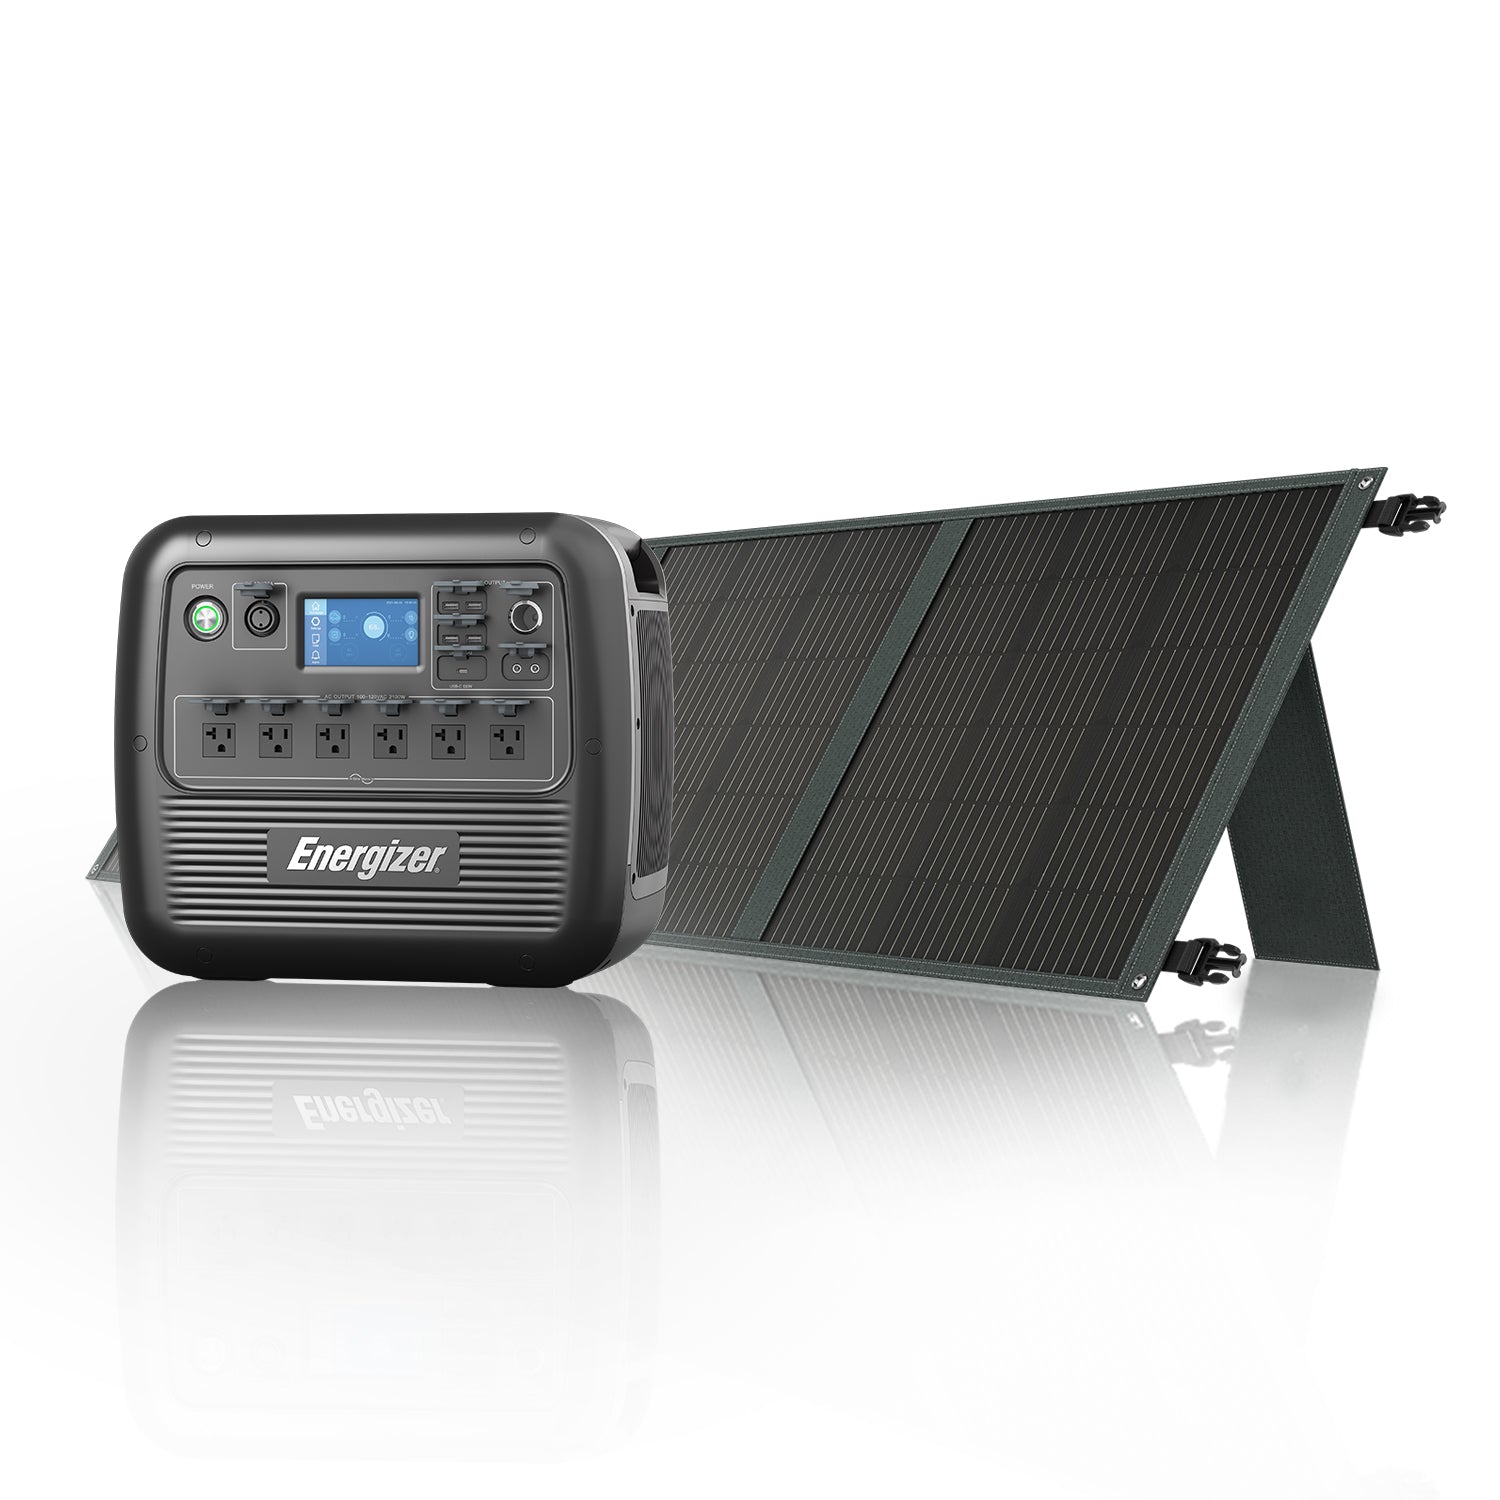 Energizer PPS2000 portable power station with 220w 200w solar panel